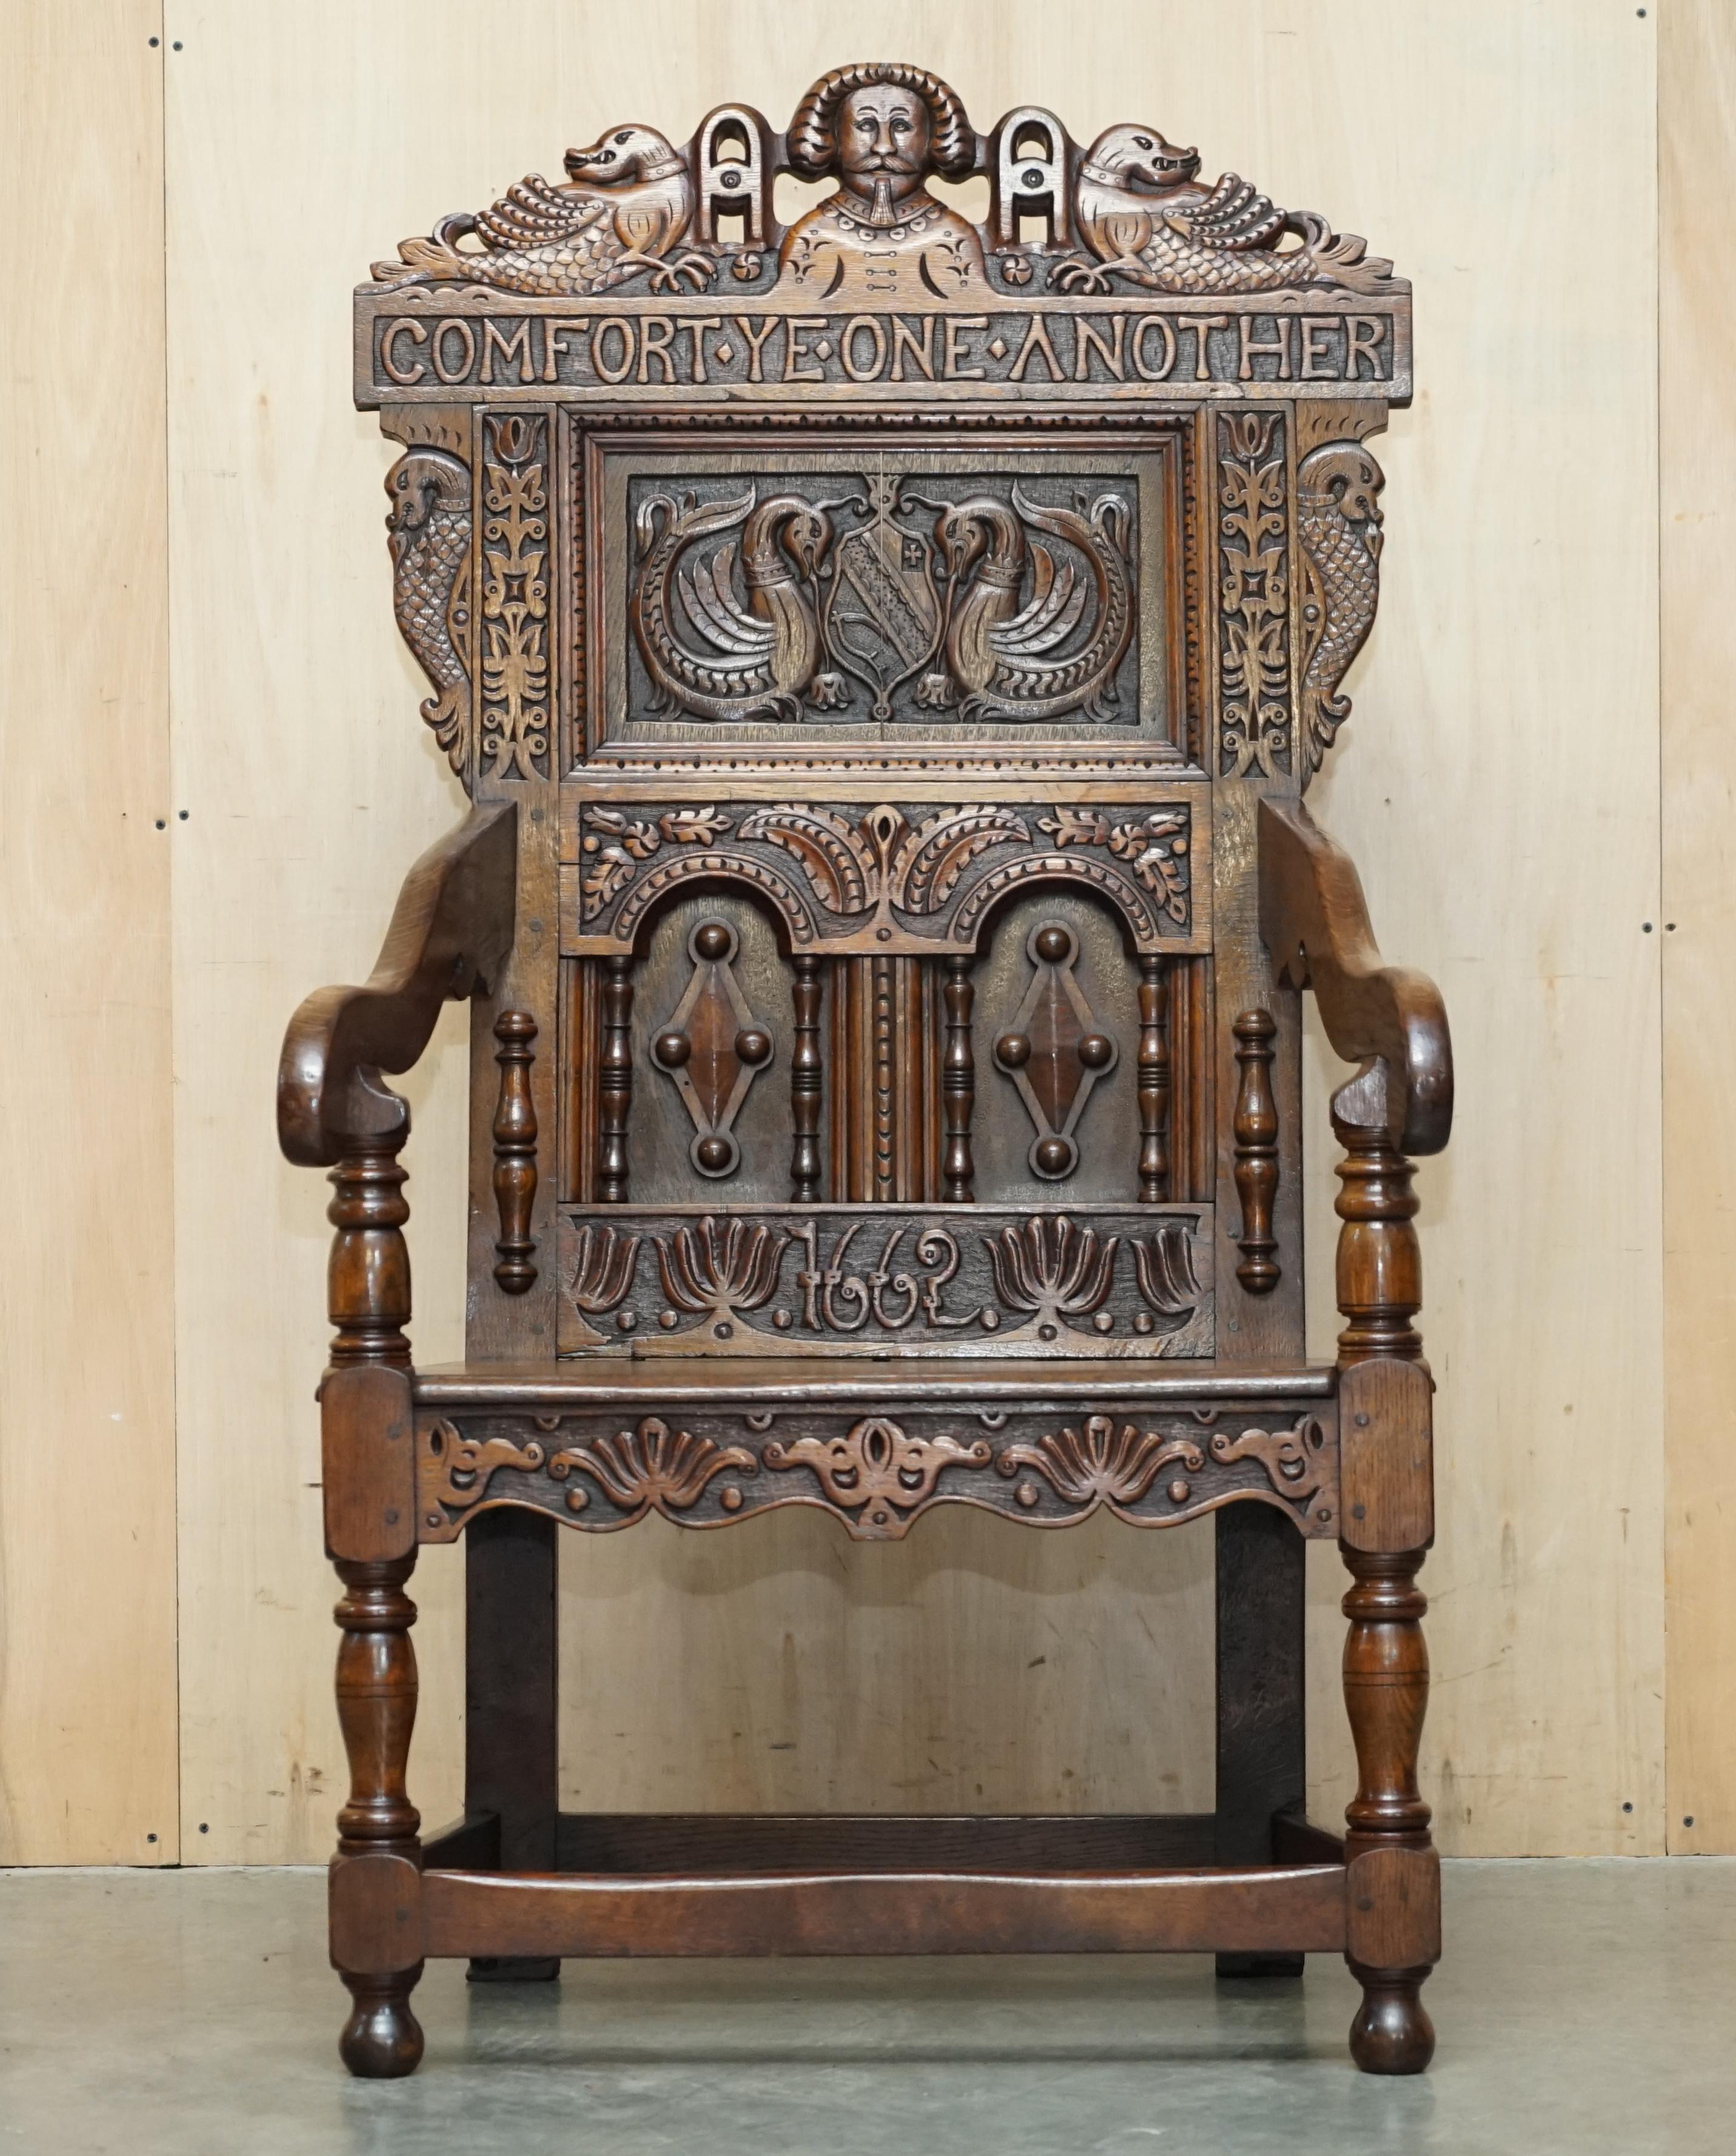 Royal House Antiques

Royal House Antiques is delighted to offer for sale this exceptionally rare, 1662 dated, Northern English hand carved from solid oak Wainscot armchair with the quote 